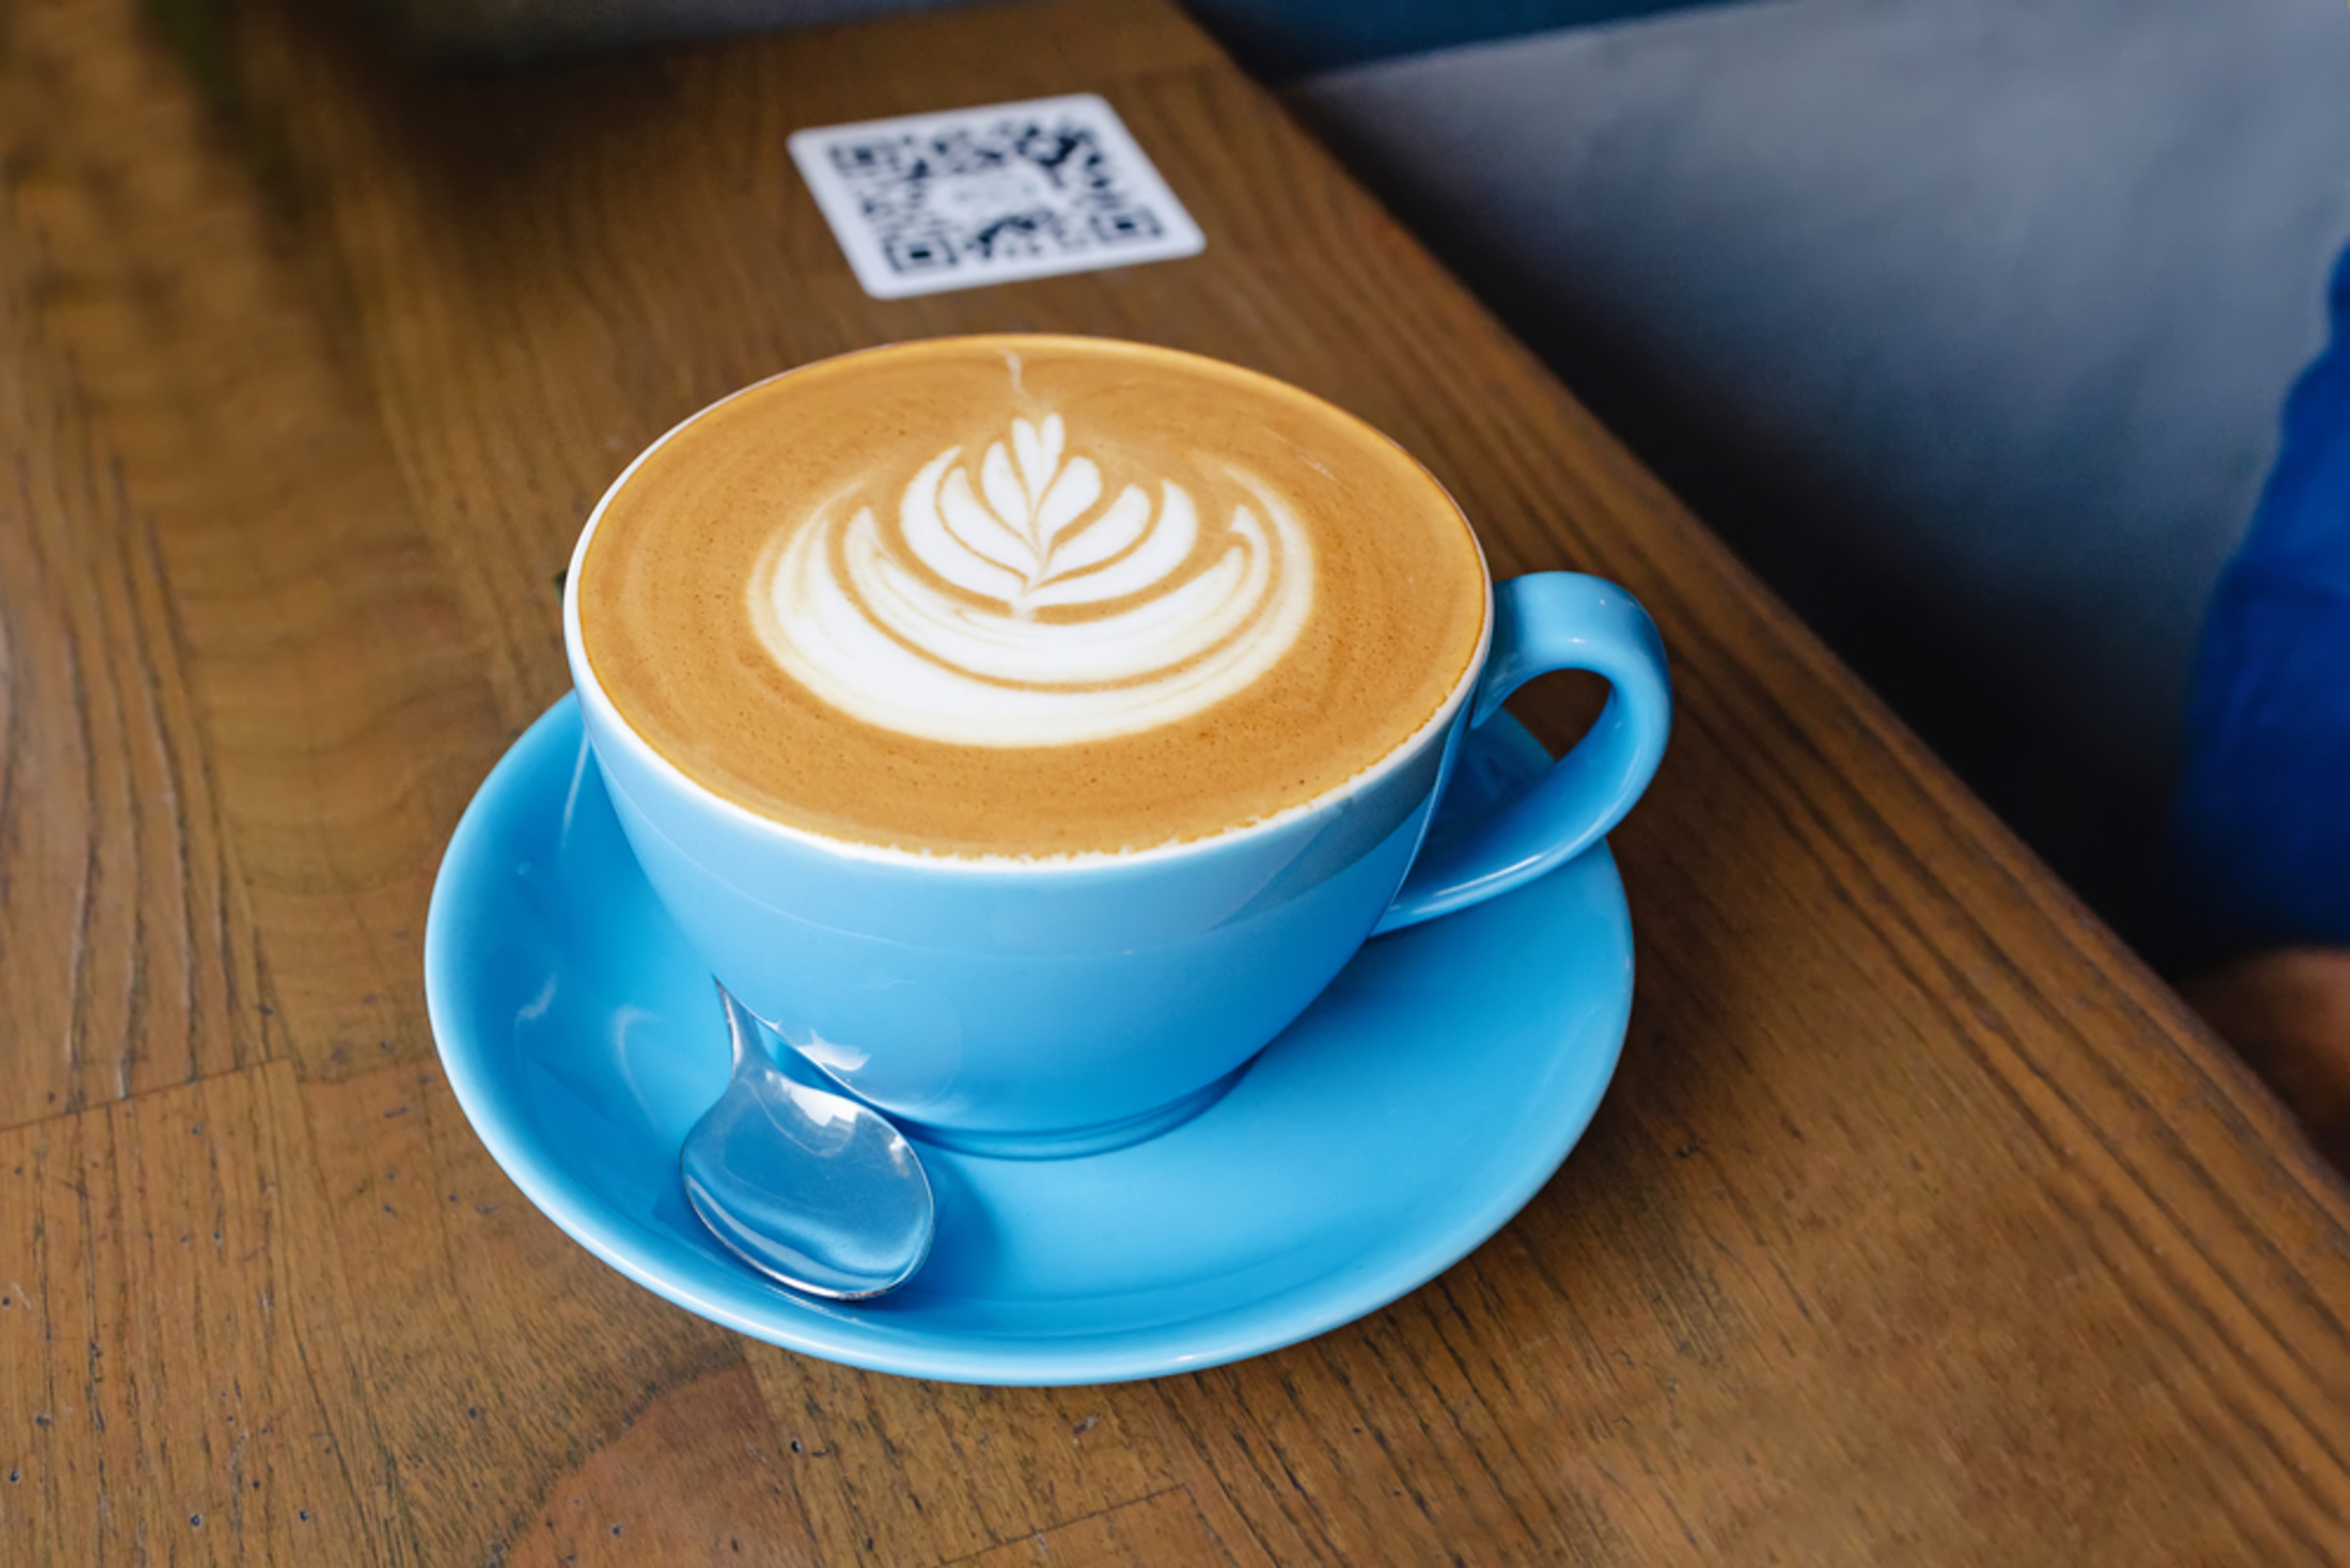 <p>Feeling jittery, anxious, or having trouble sleeping? Your daily latte may be to blame. Whether you're a coffee drinker or a tea fan, consider cutting back on your caffeine consumption and see if your mental health improves. </p><p>You may also like: <a href='https://www.yardbarker.com/lifestyle/articles/20_items_we_always_include_on_our_charcuterie_board/s1__38337643'>20 items we always include on our charcuterie board</a></p>